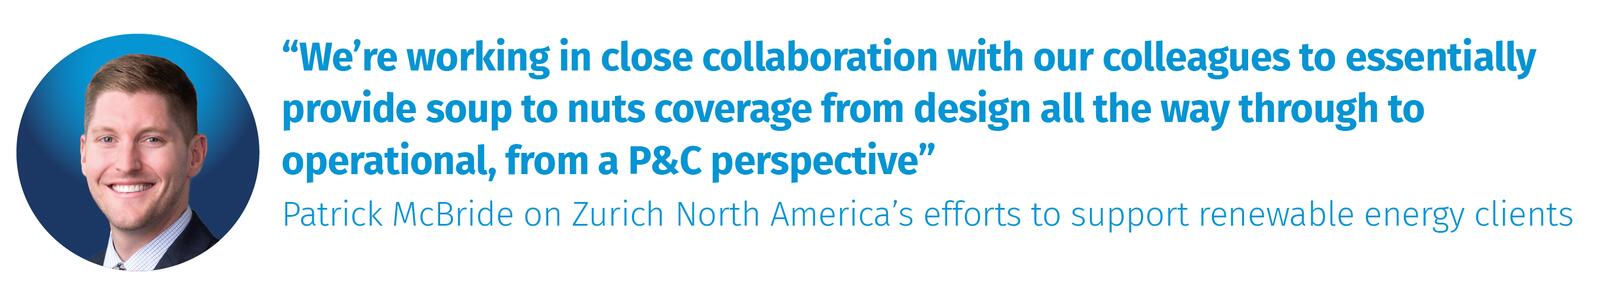 Patrick McBride on Zurich North America’s efforts to support renewable energy clients